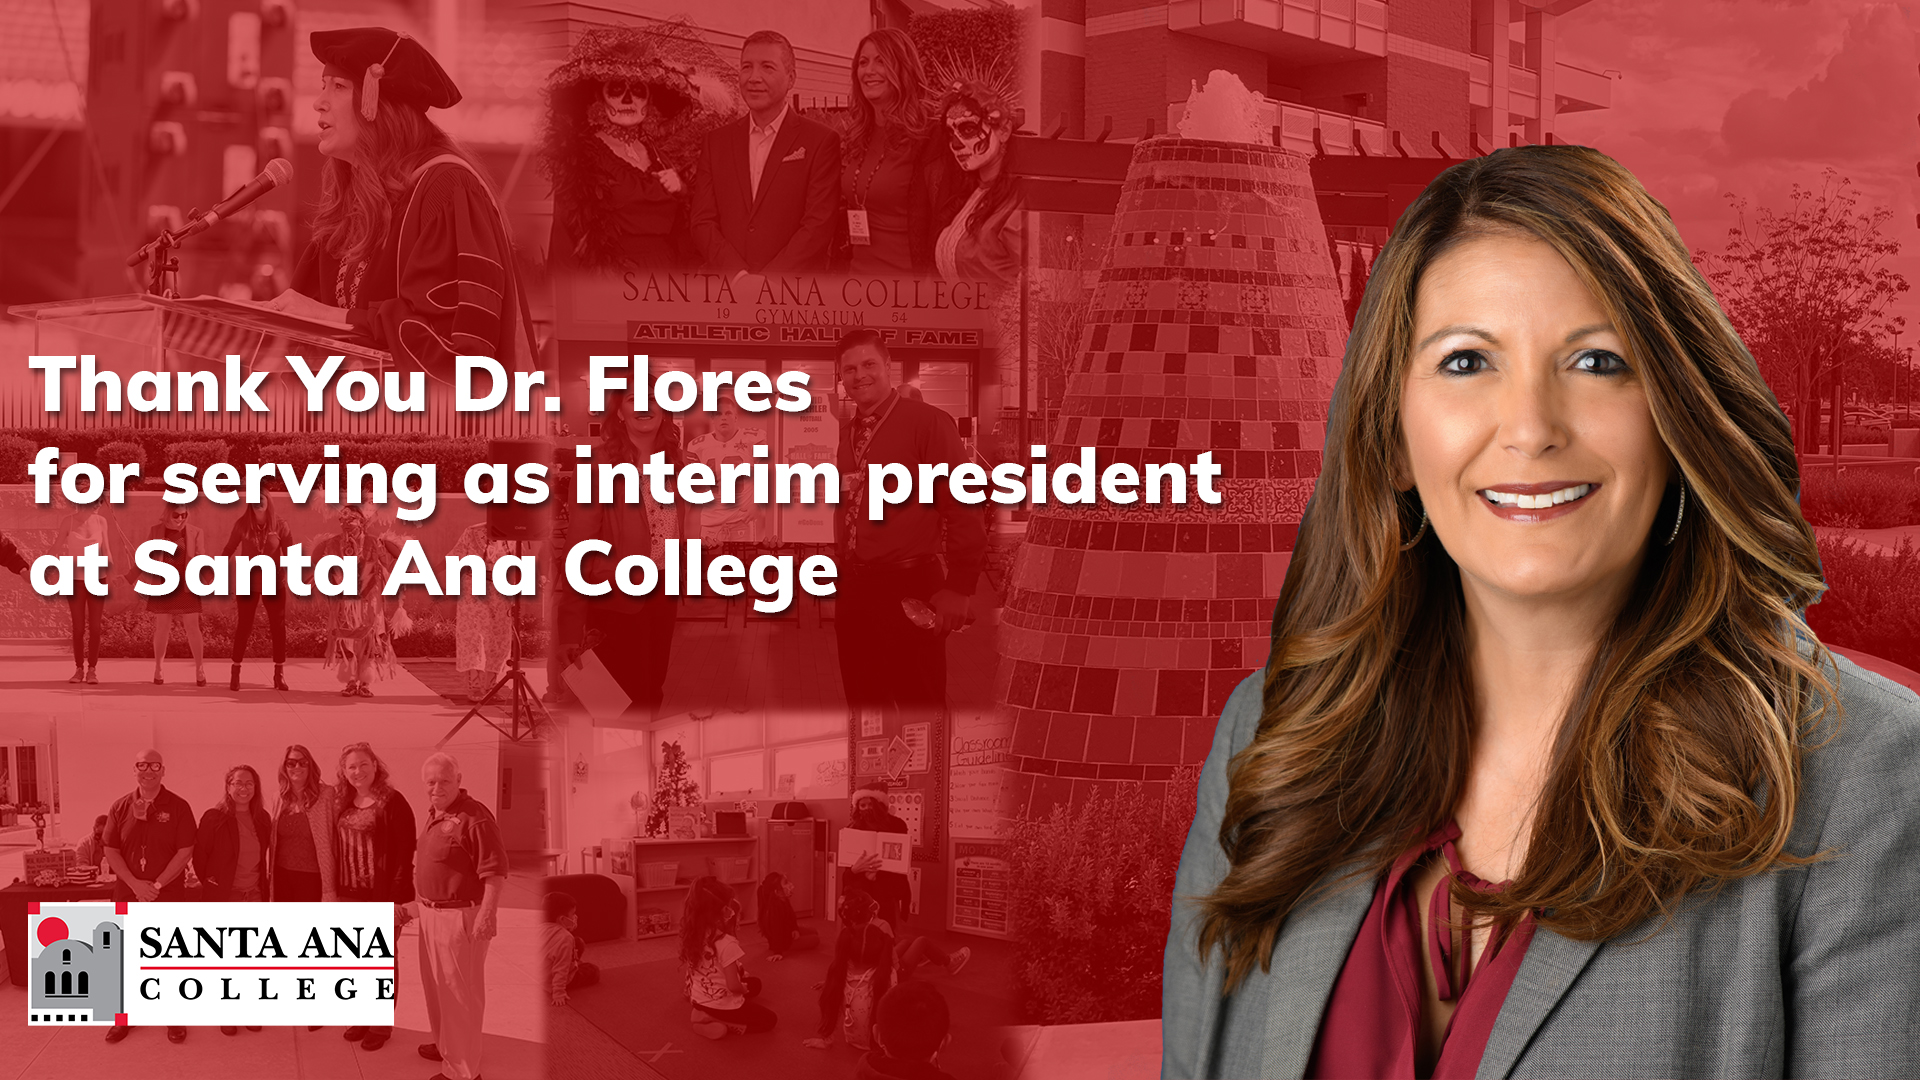 Thank you Dr. Flores for serving as interim president at santa ana college